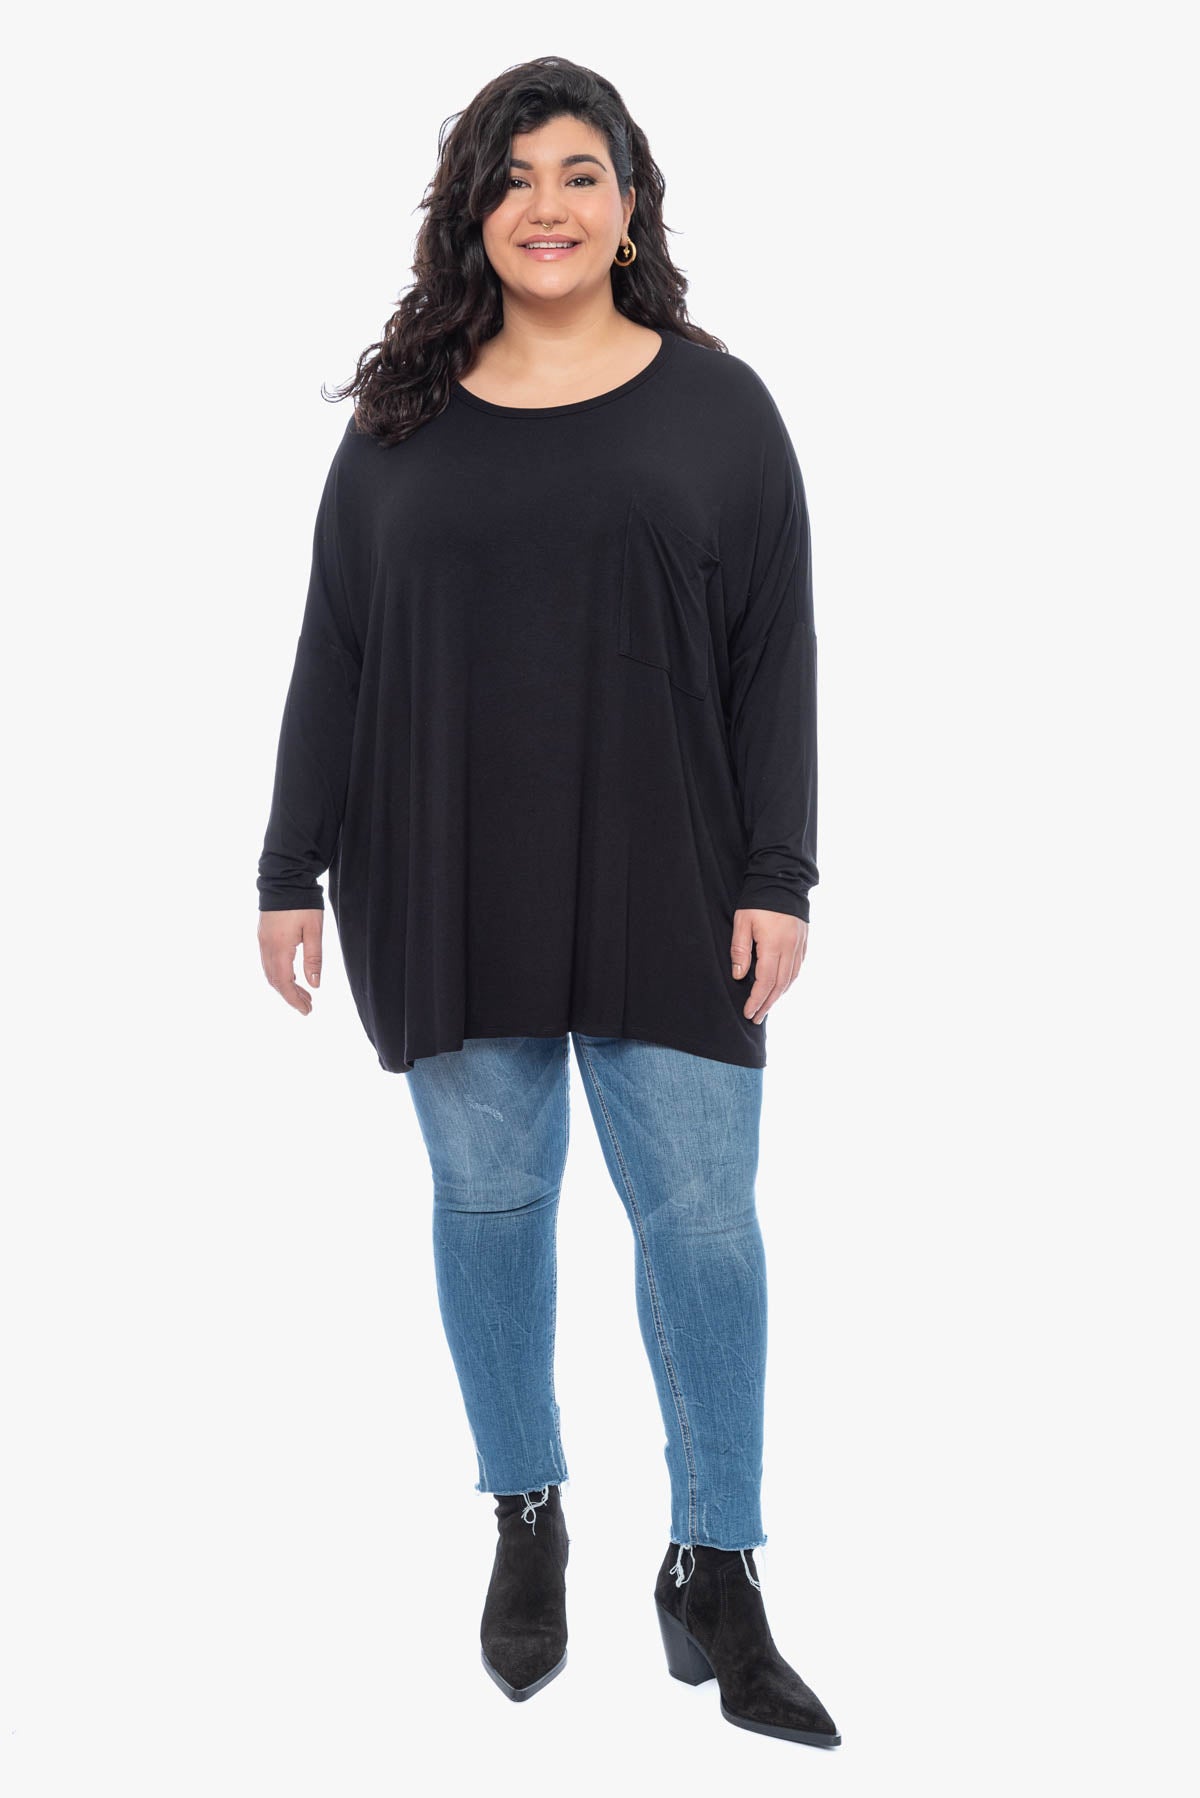 SHAWN R oversized top